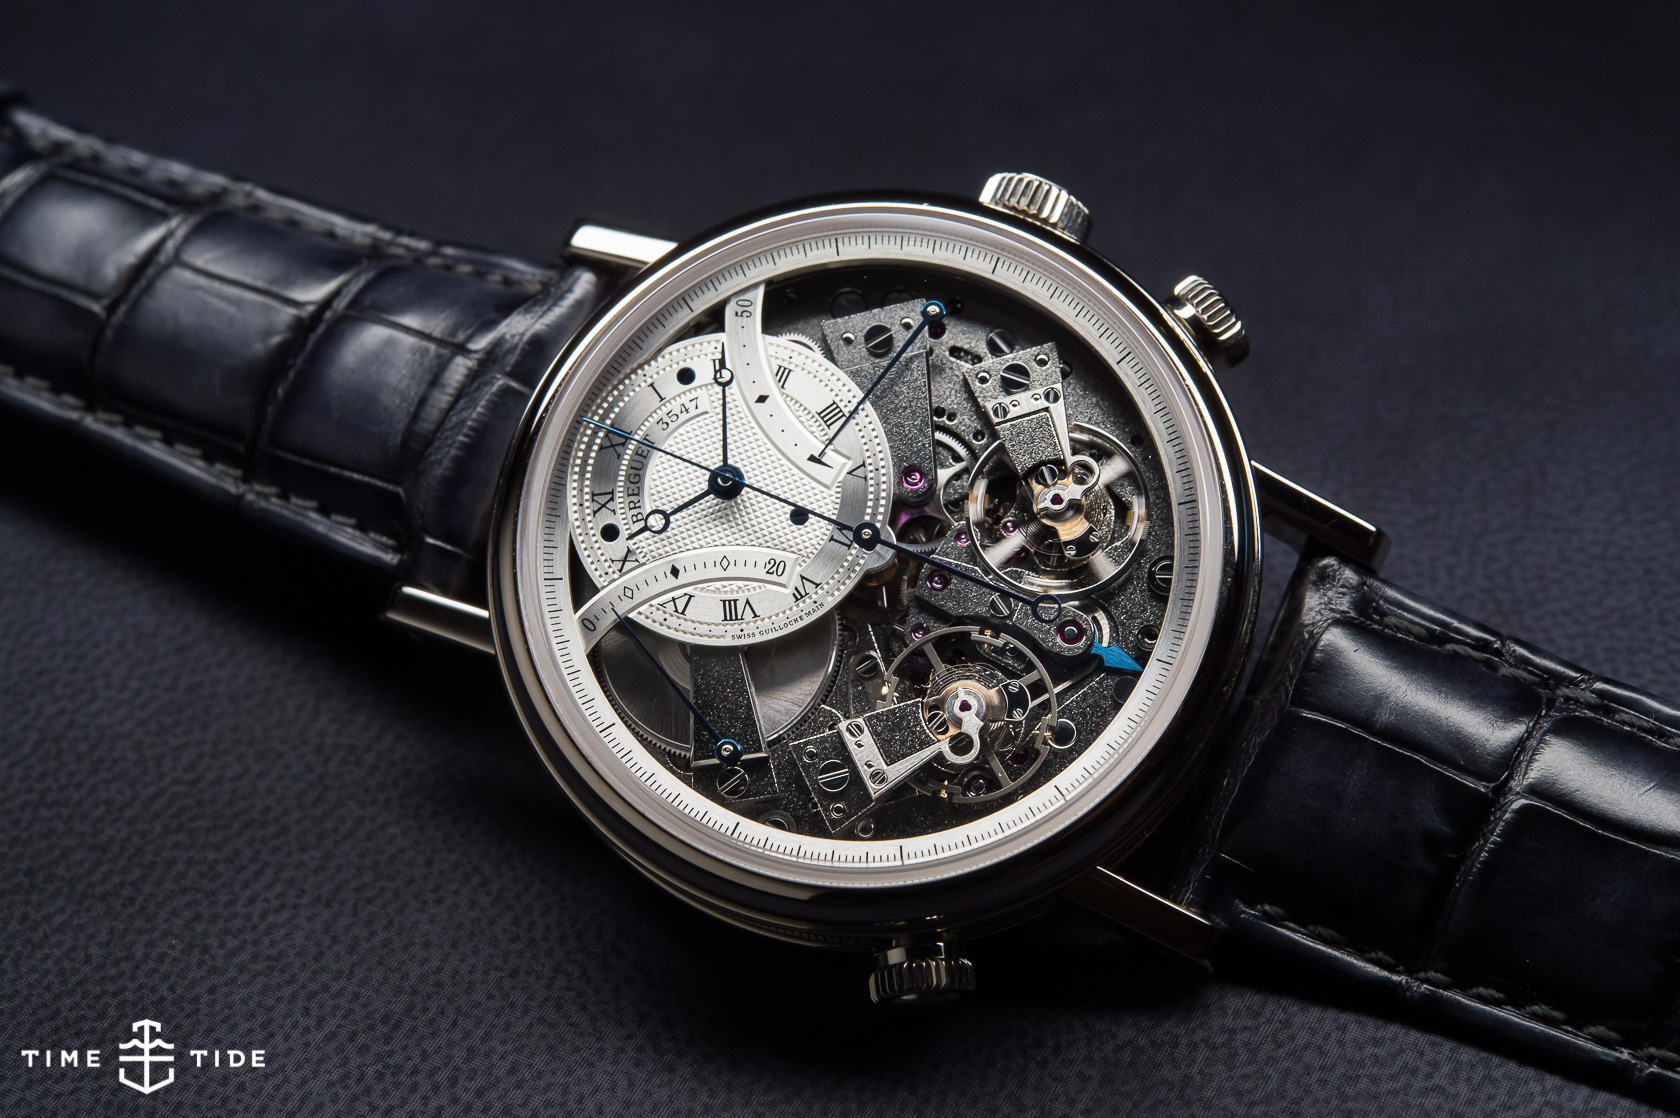 EDITOR'S PICK: If you love watches, then you need to know these 5 ...